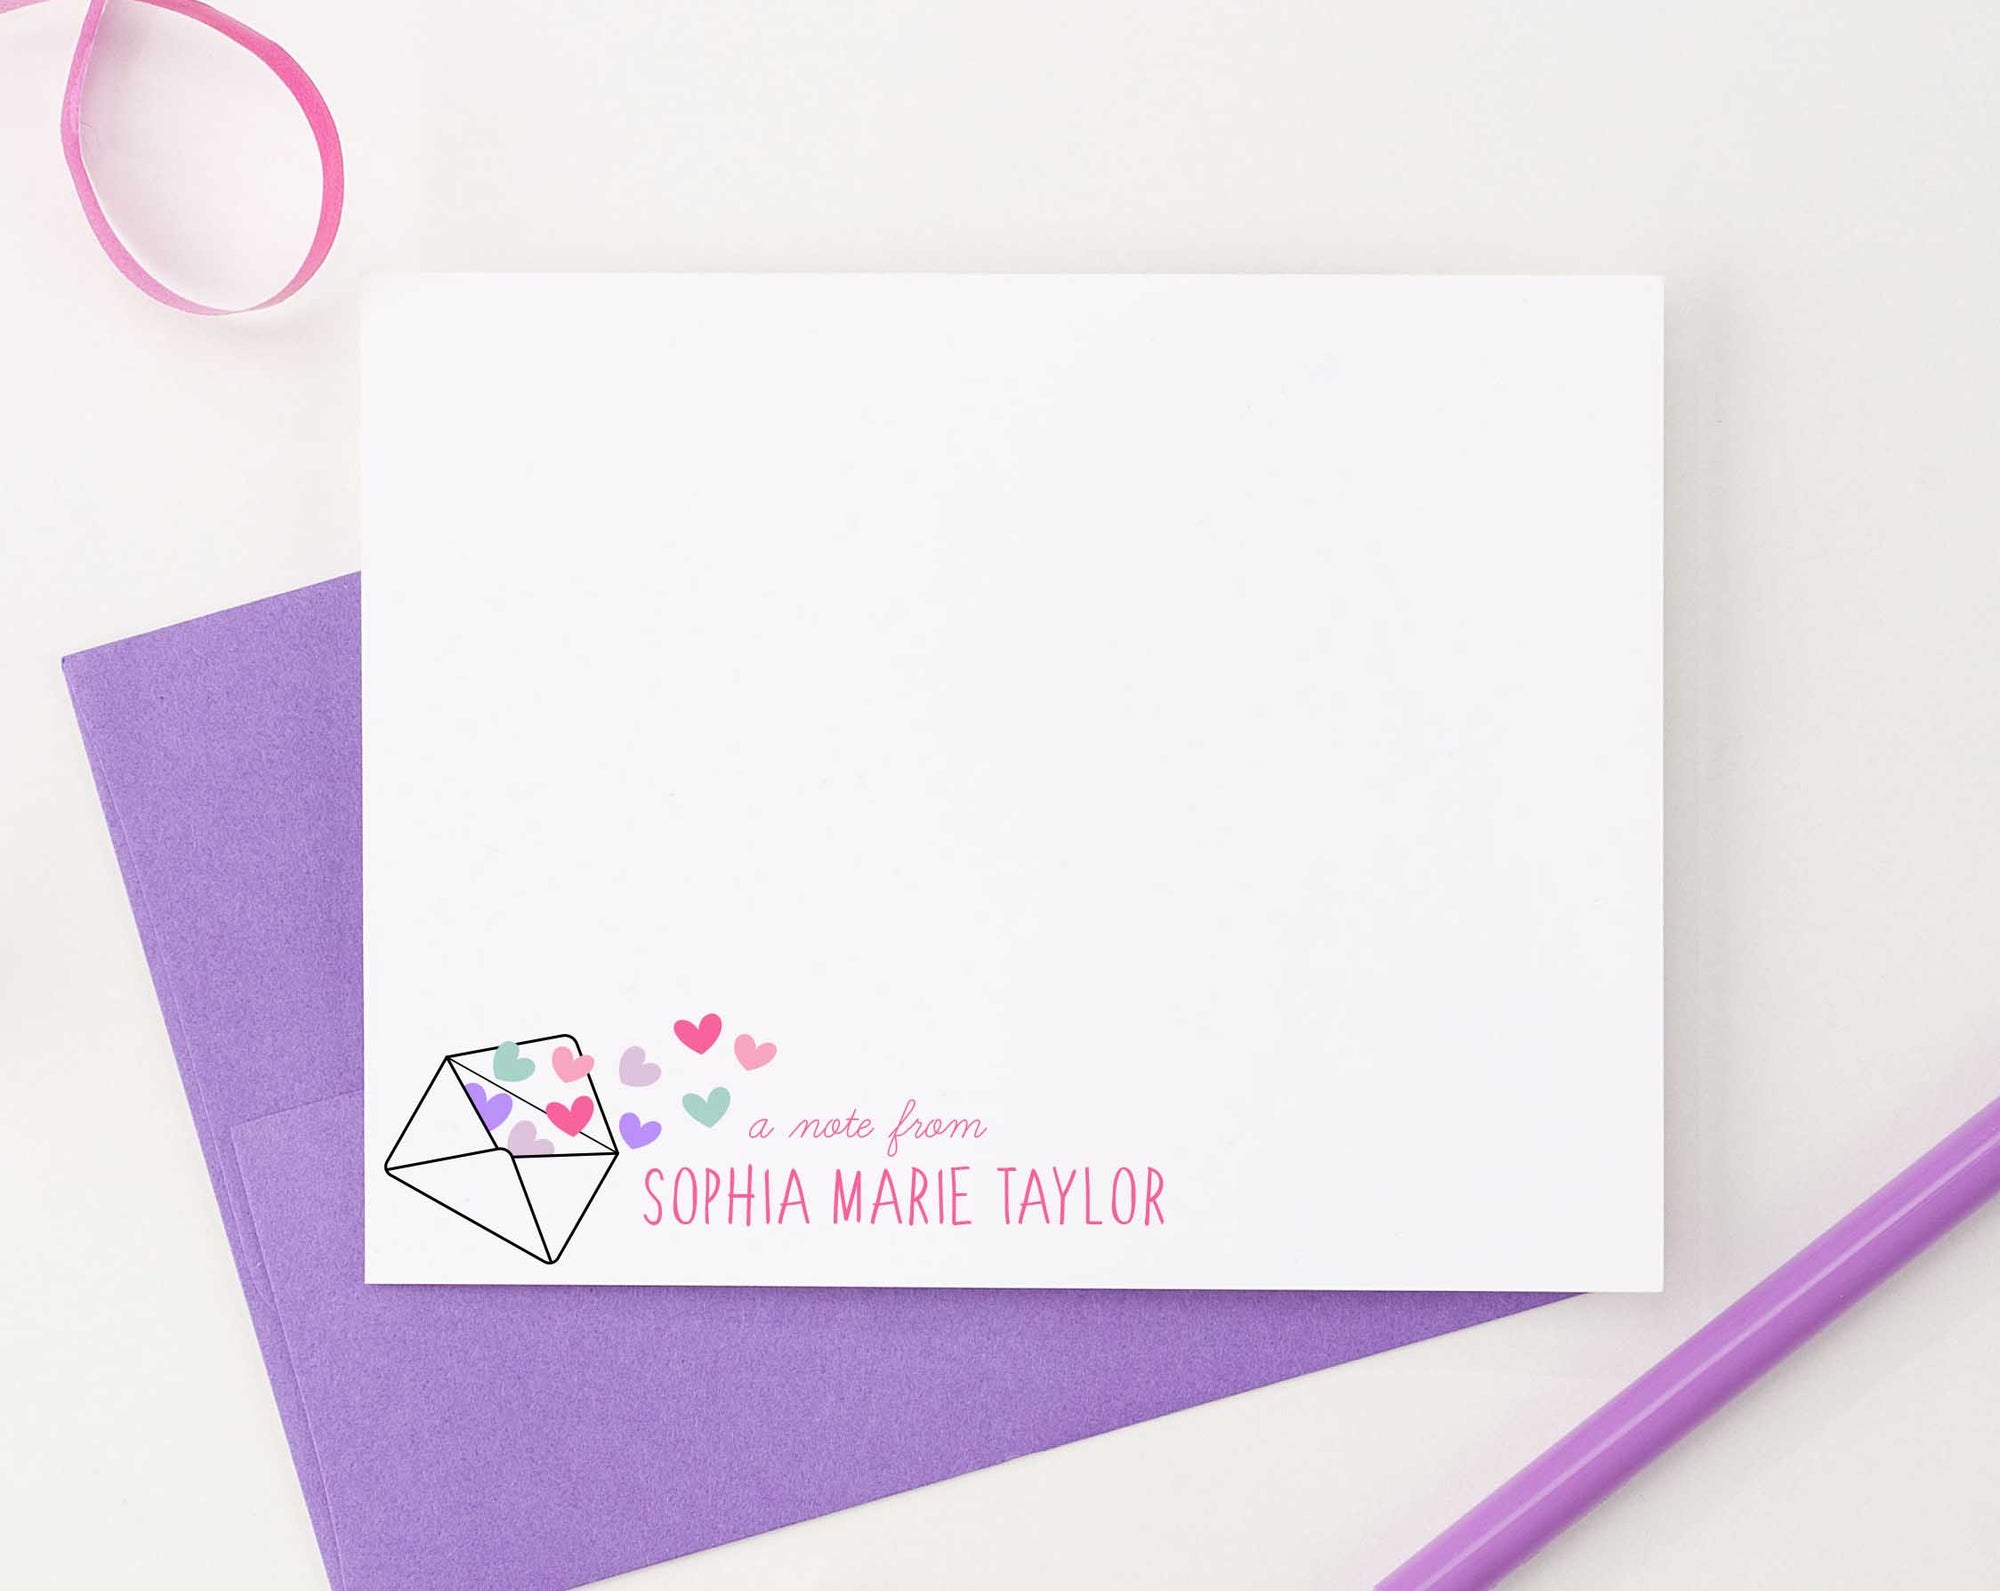 KS123 a note from note cards personalized with envelope and heart shear cute fun 4